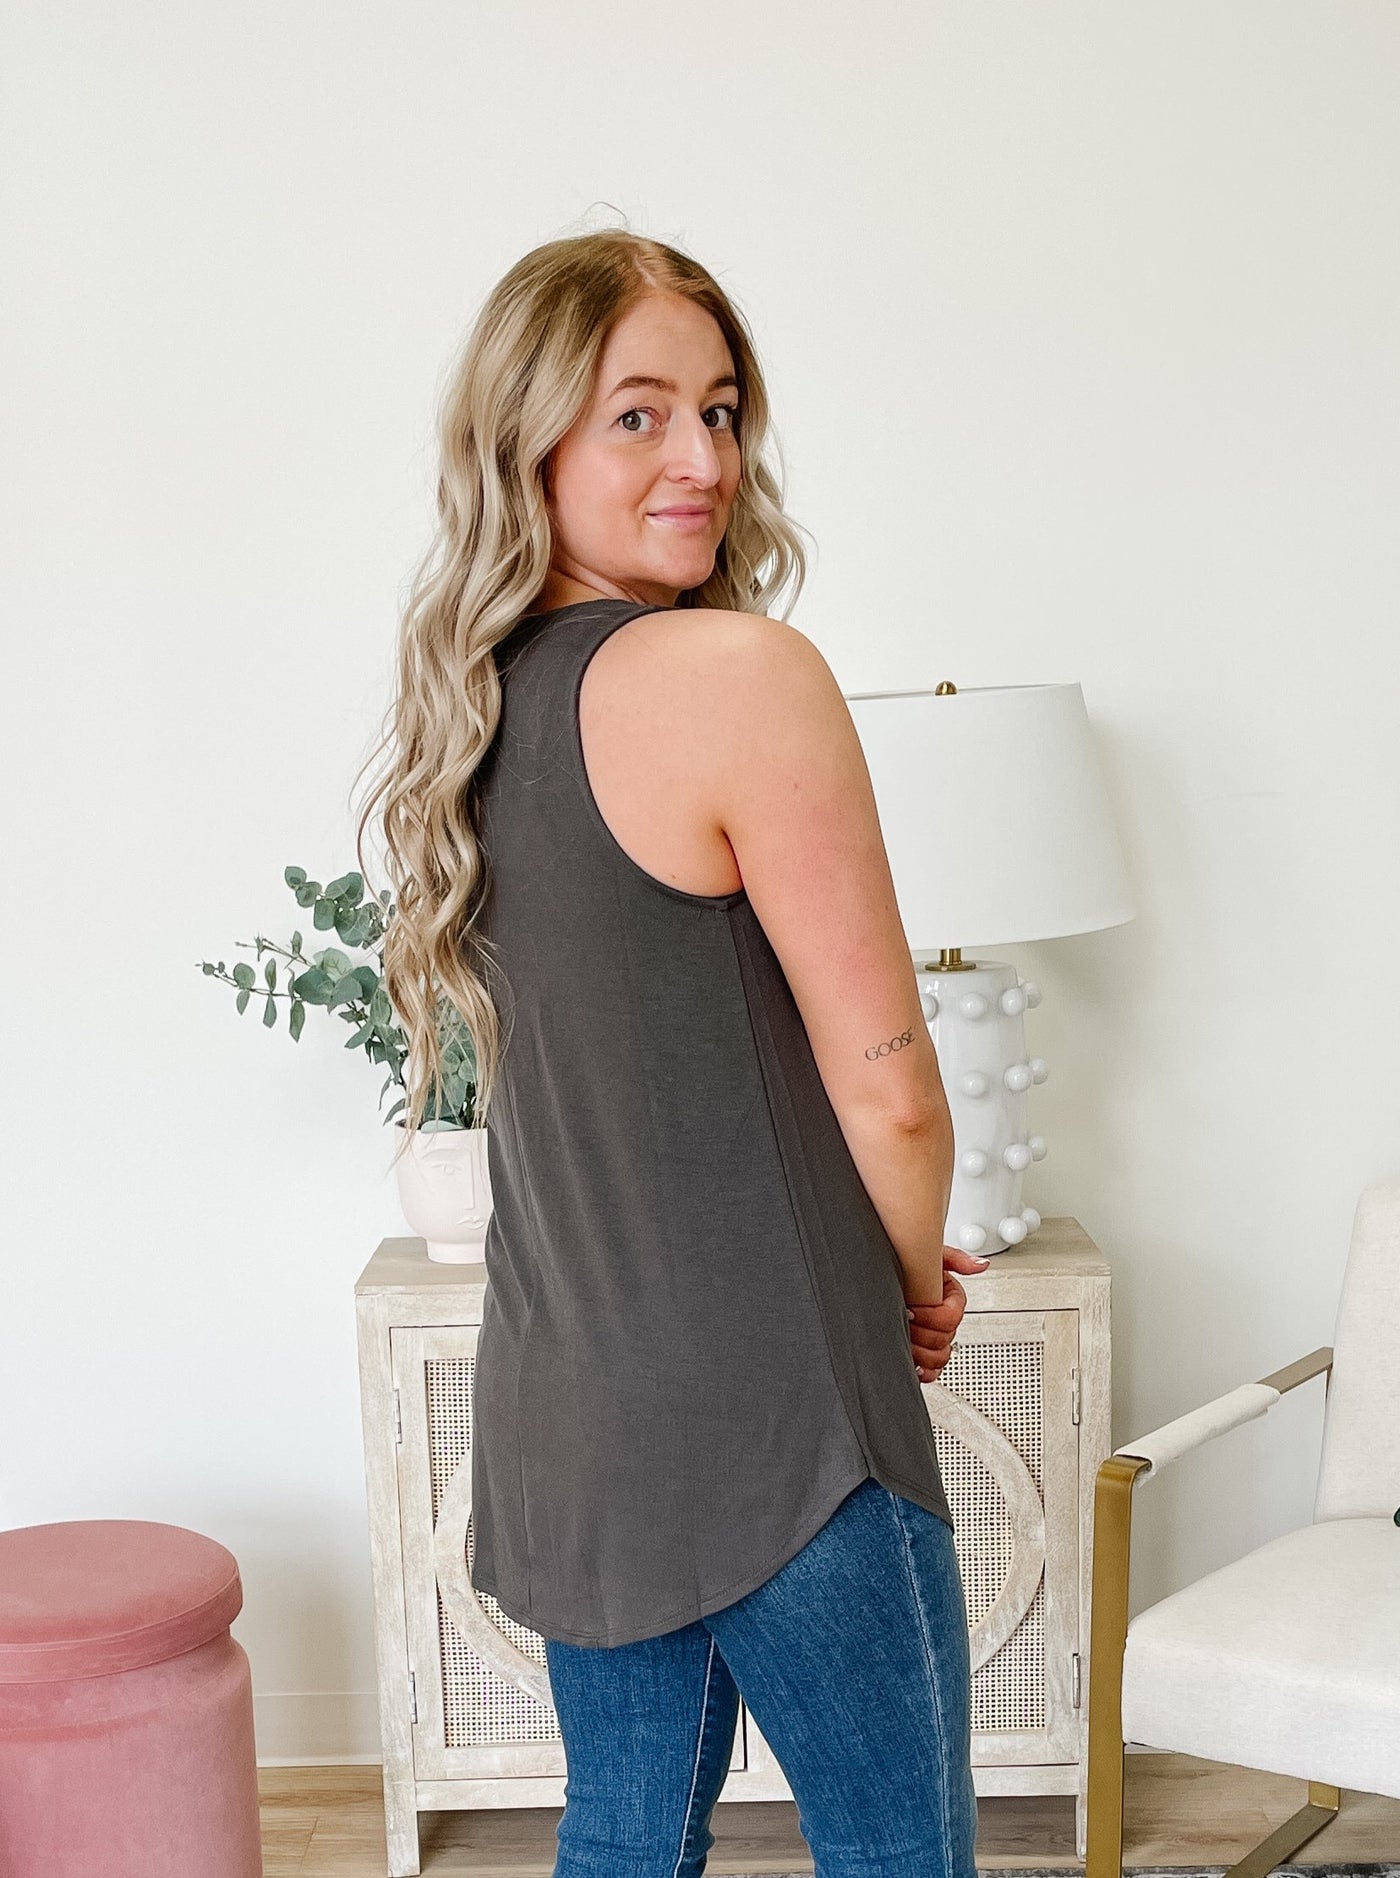 The Basic Round Neck Tank in Ash Grey